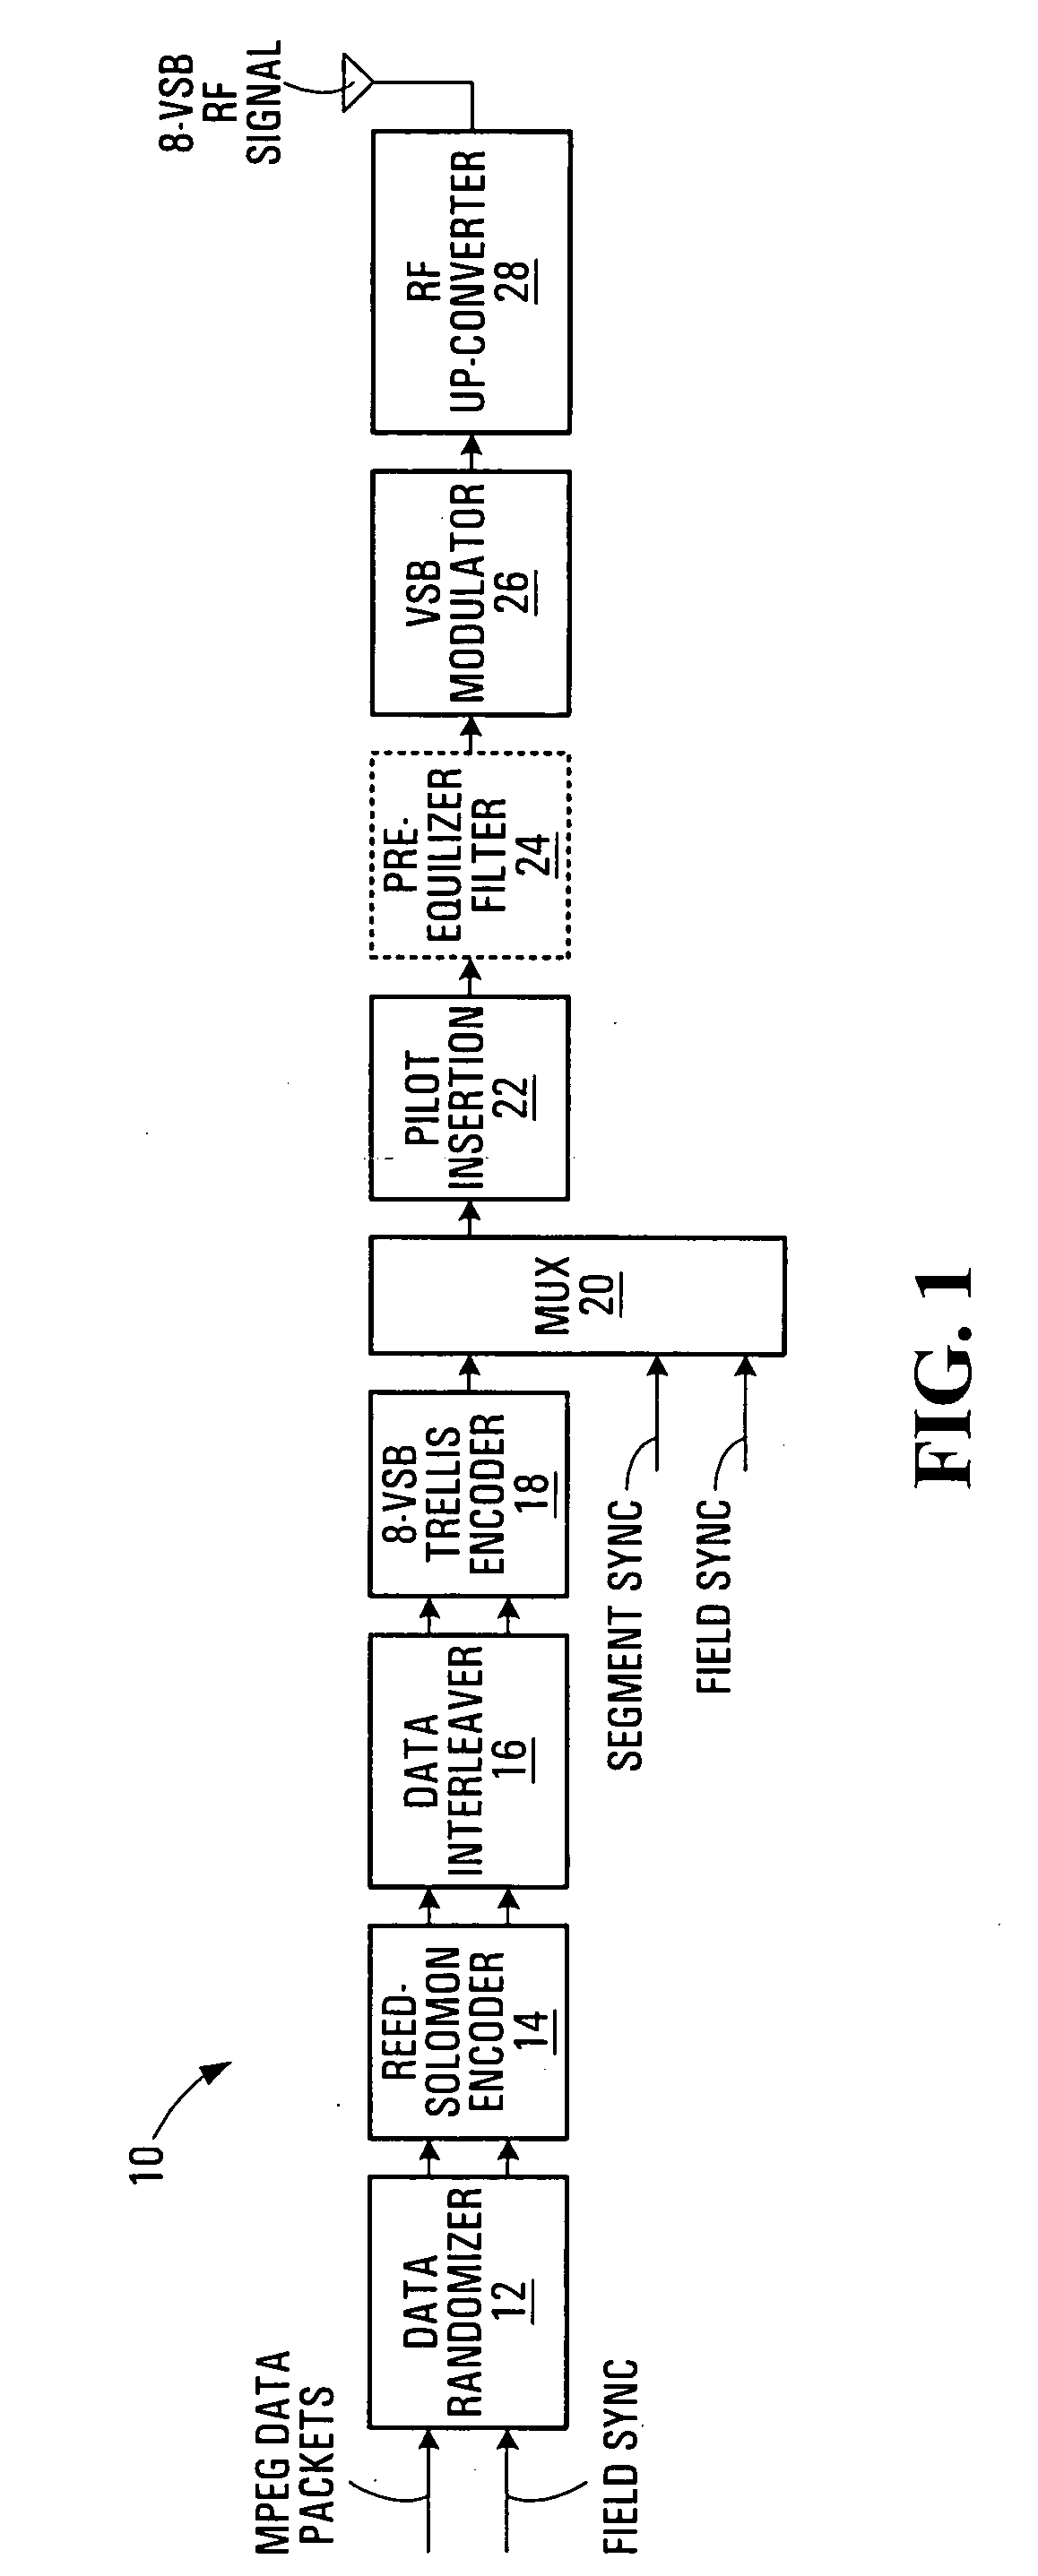 Trellis decoder for decoding data stream including symbols coded with multiple convolutional codes